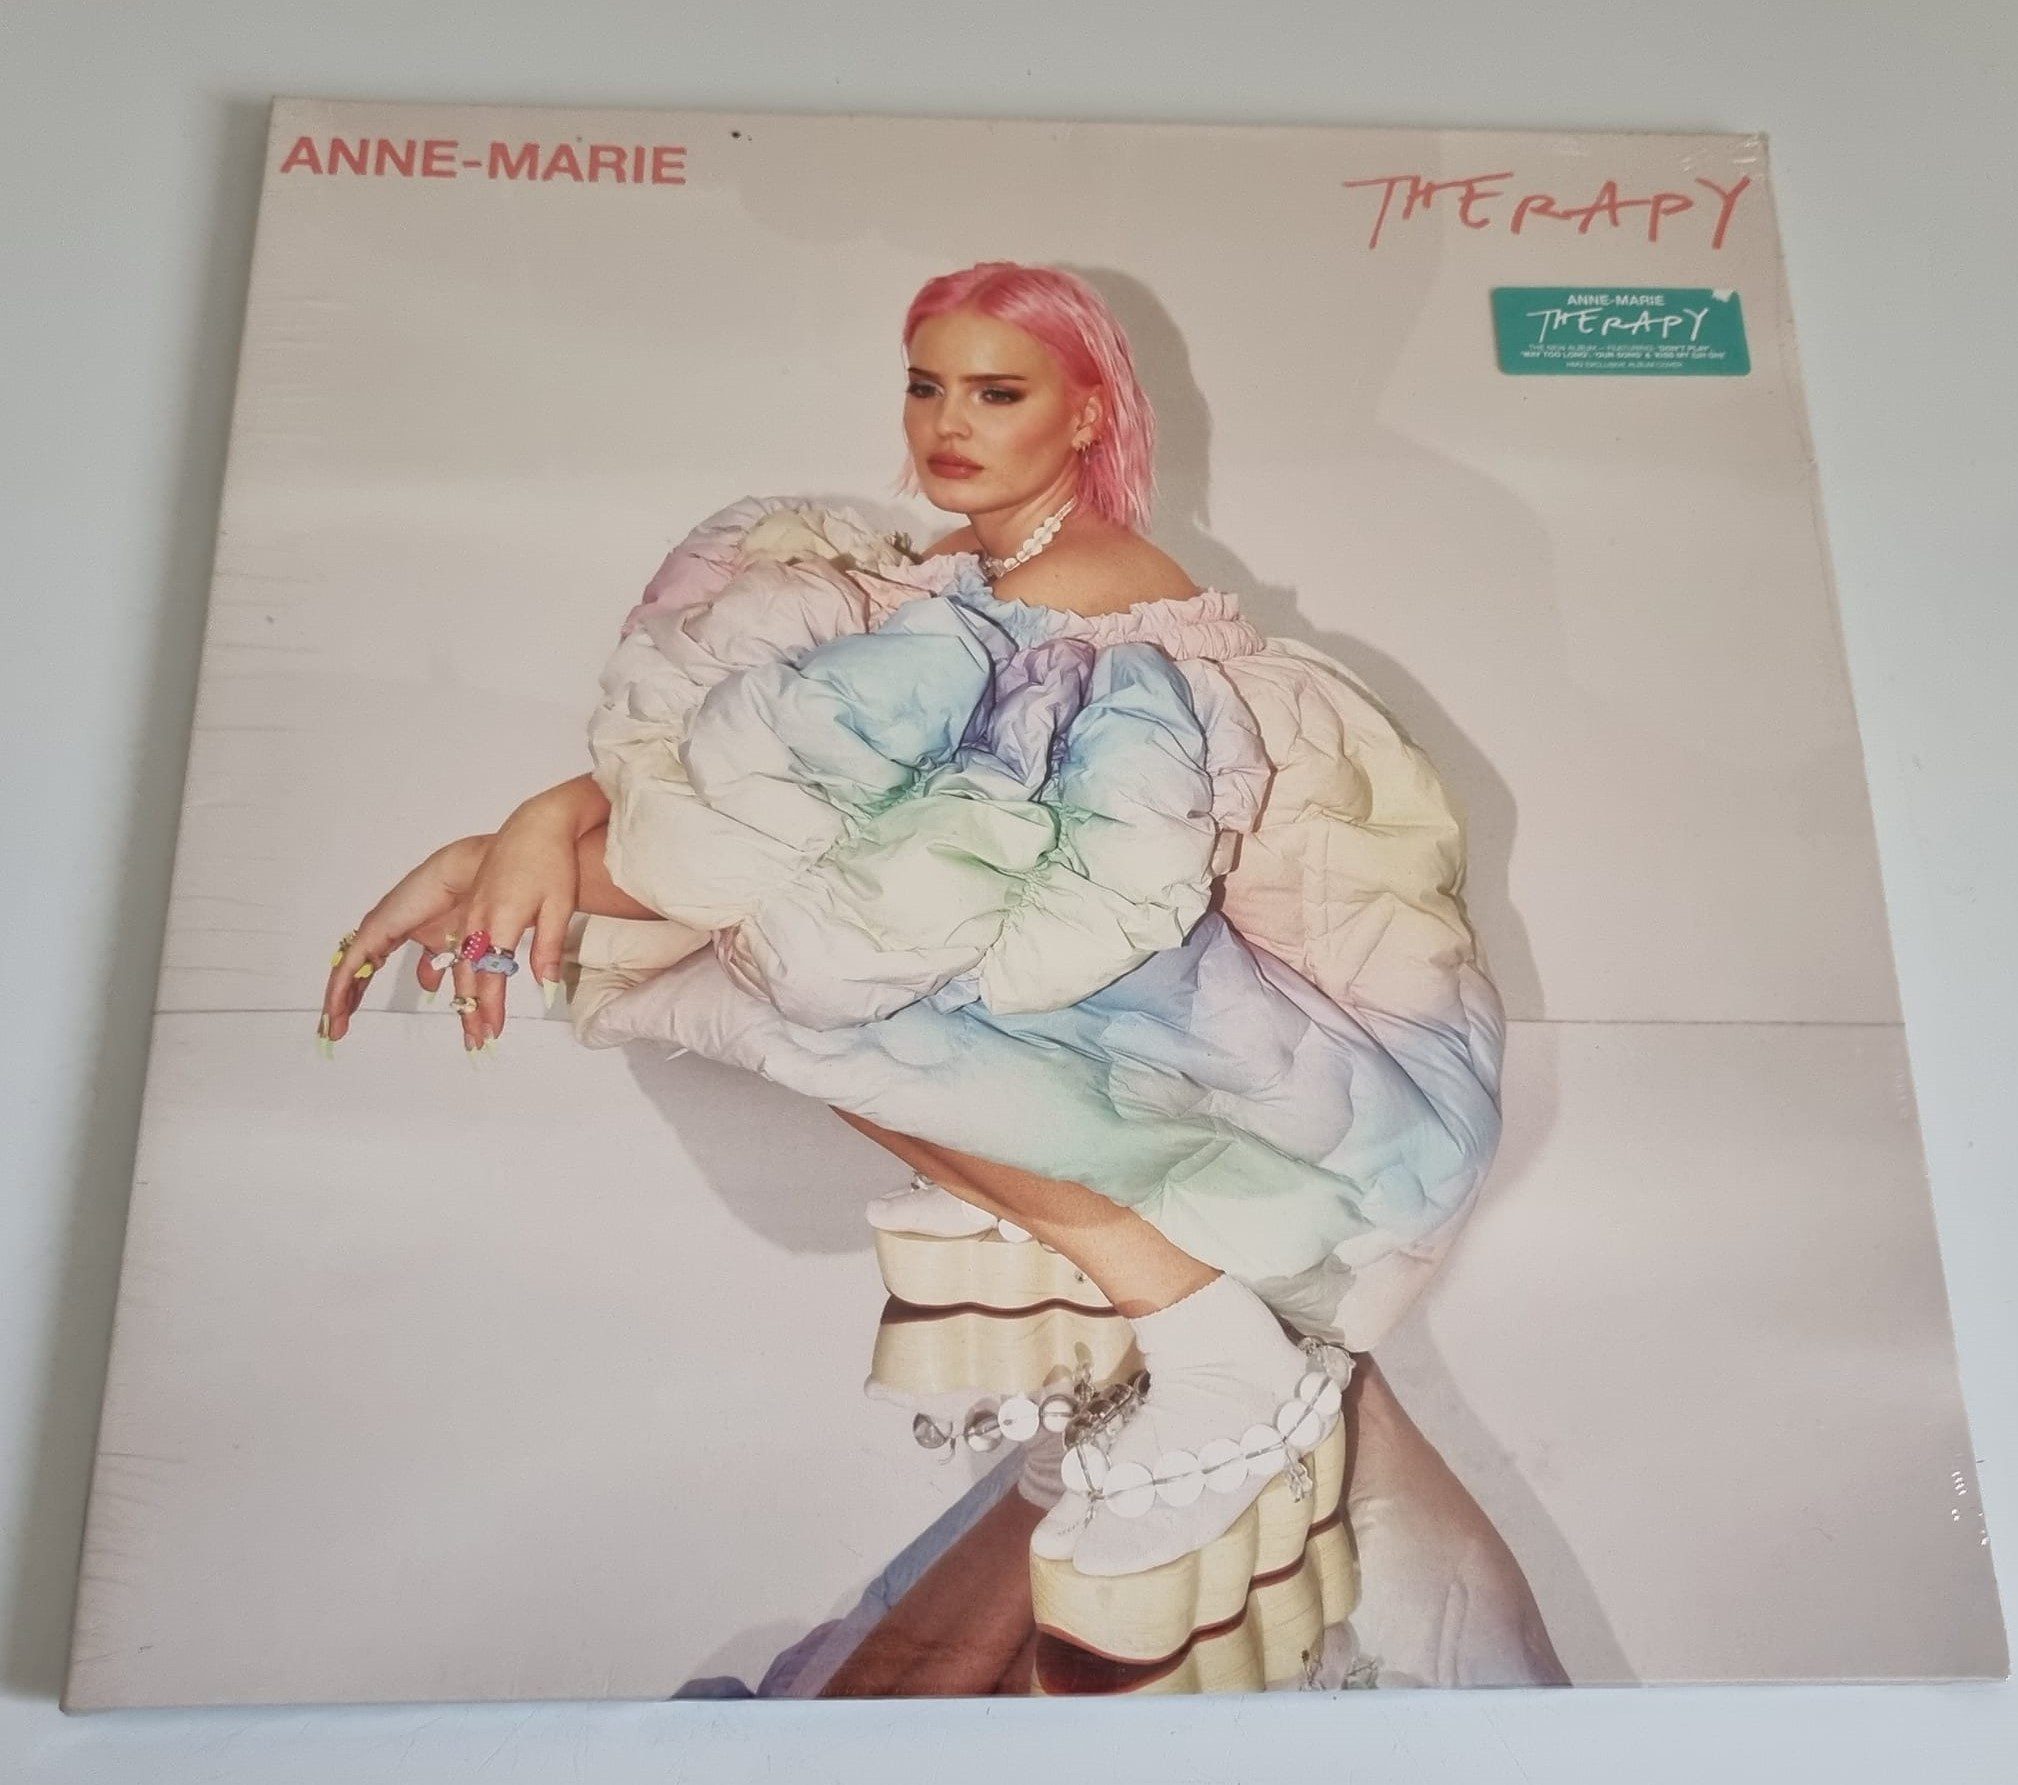 Buy this rare Anne Marie record by clicking here